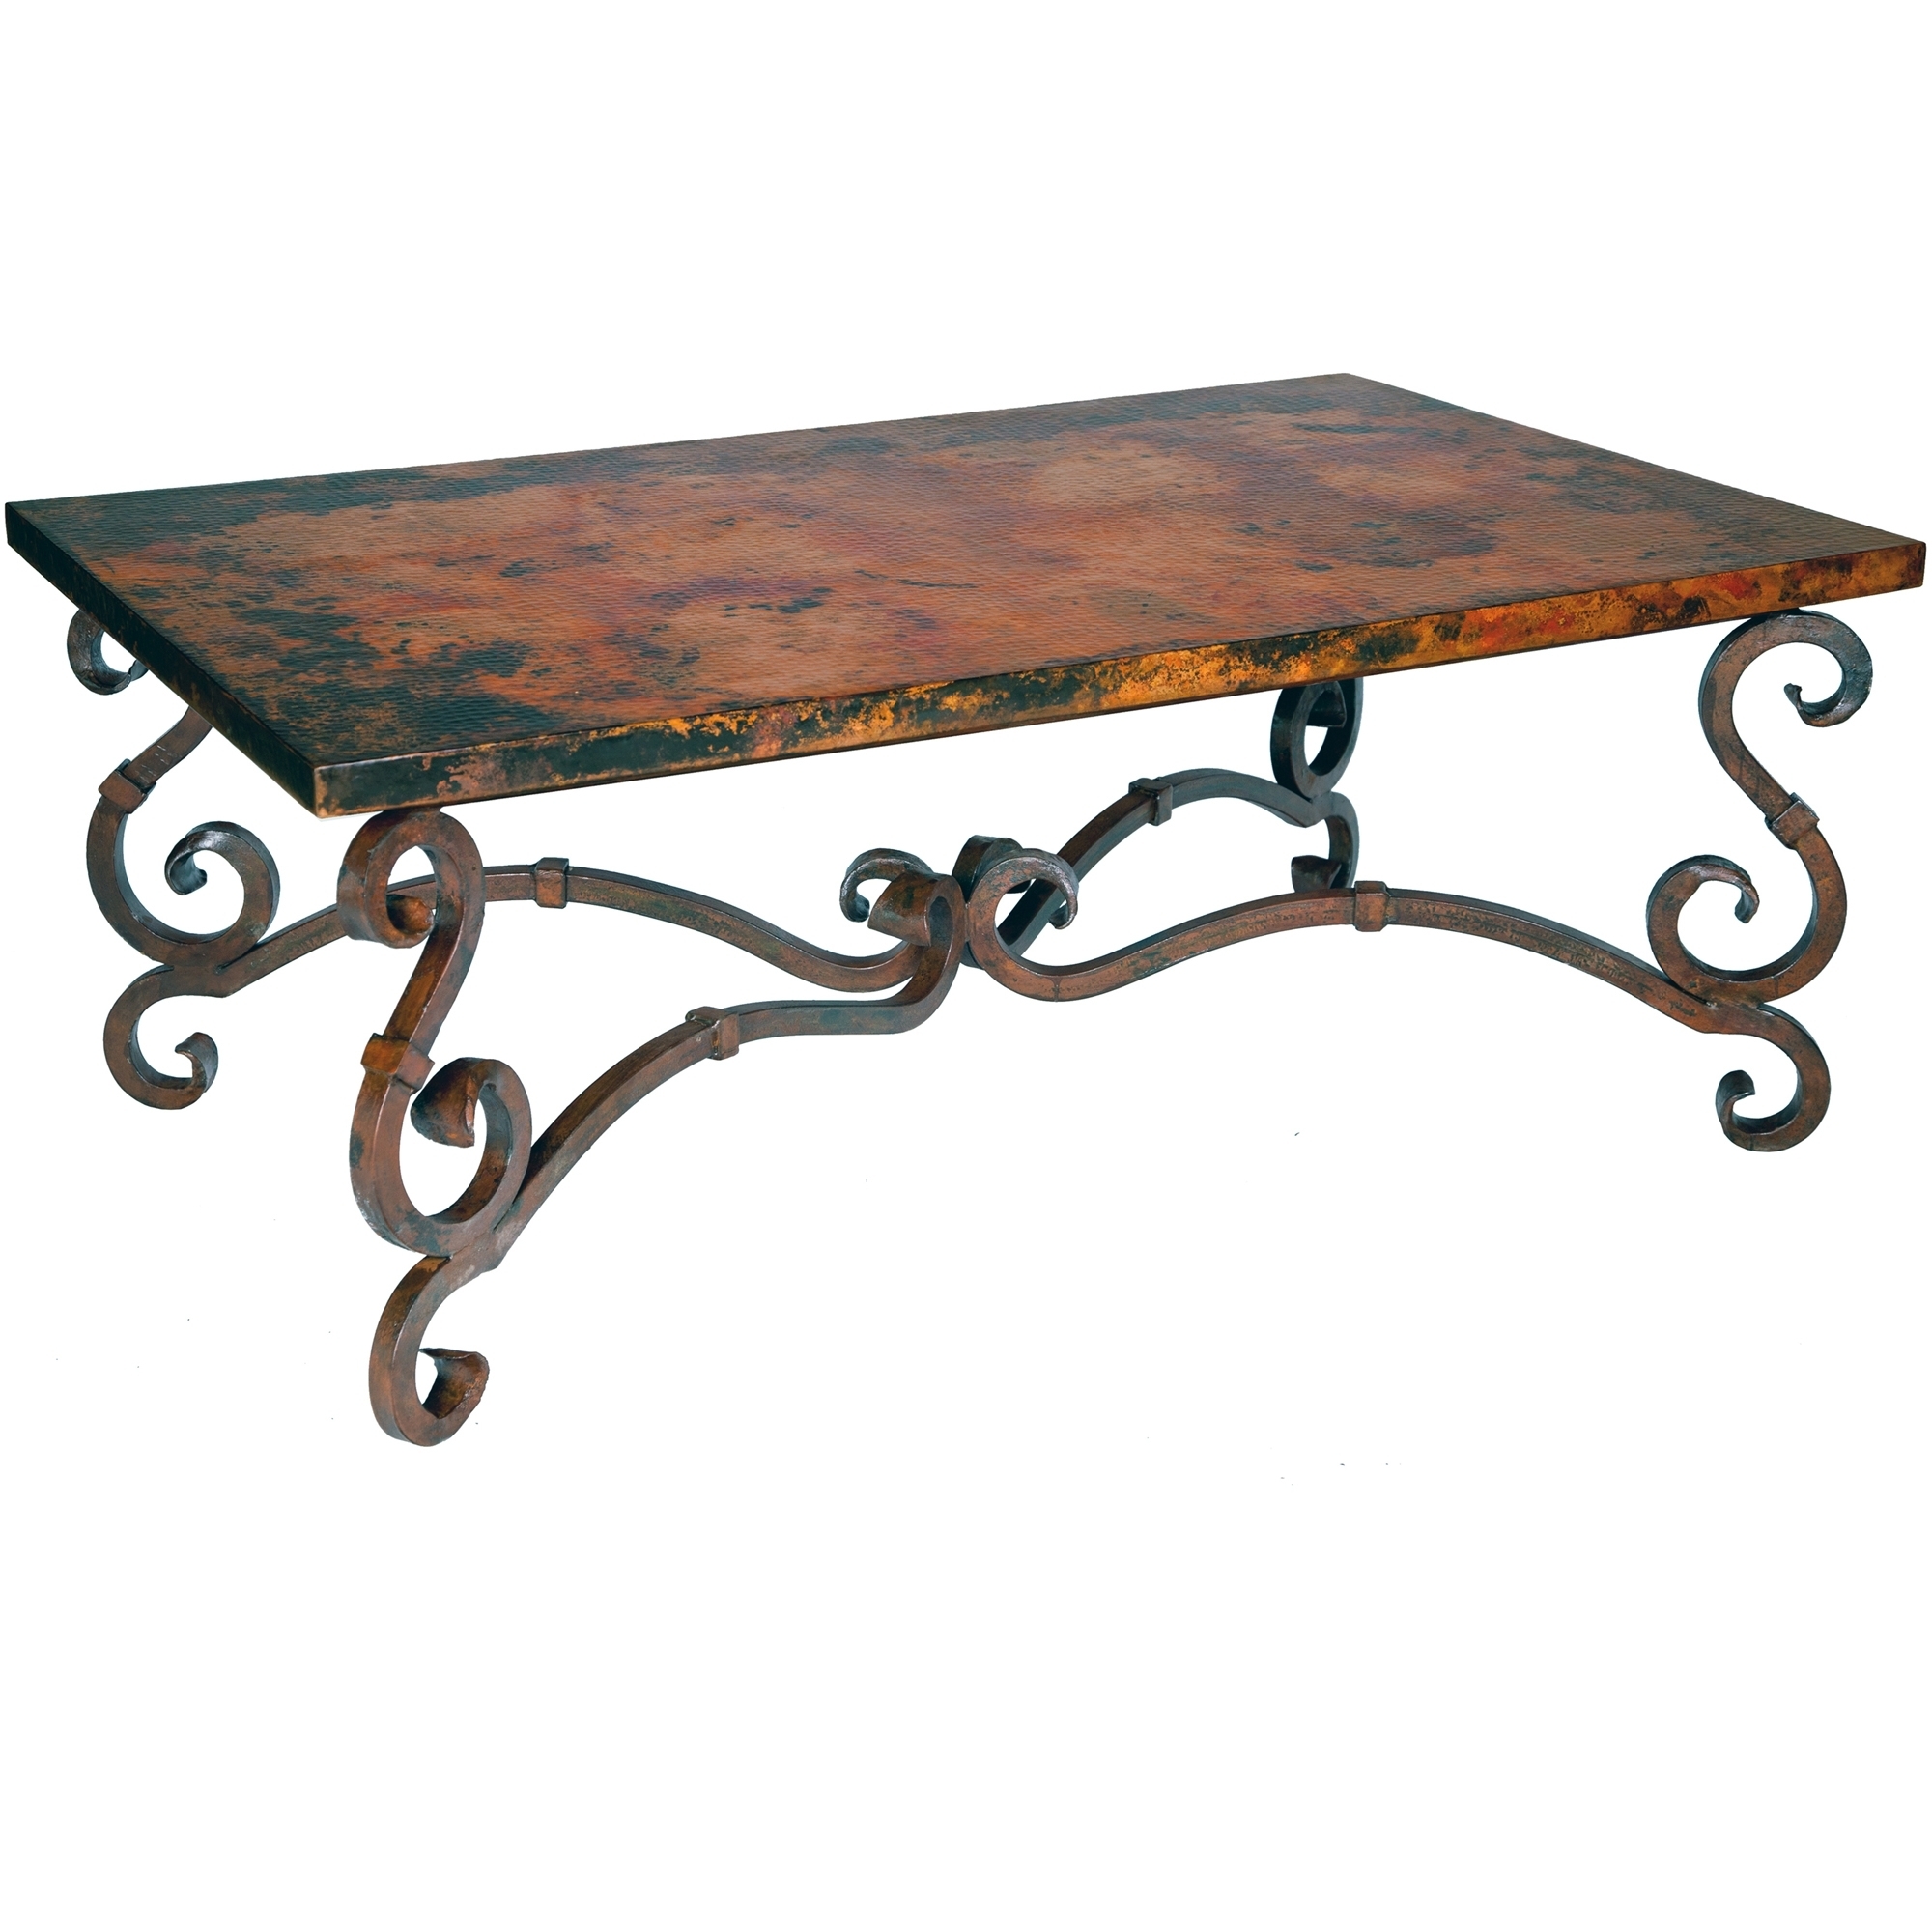 Wrought Iron Coffee Table Outdoor : However Gifted Creative Home Round ...